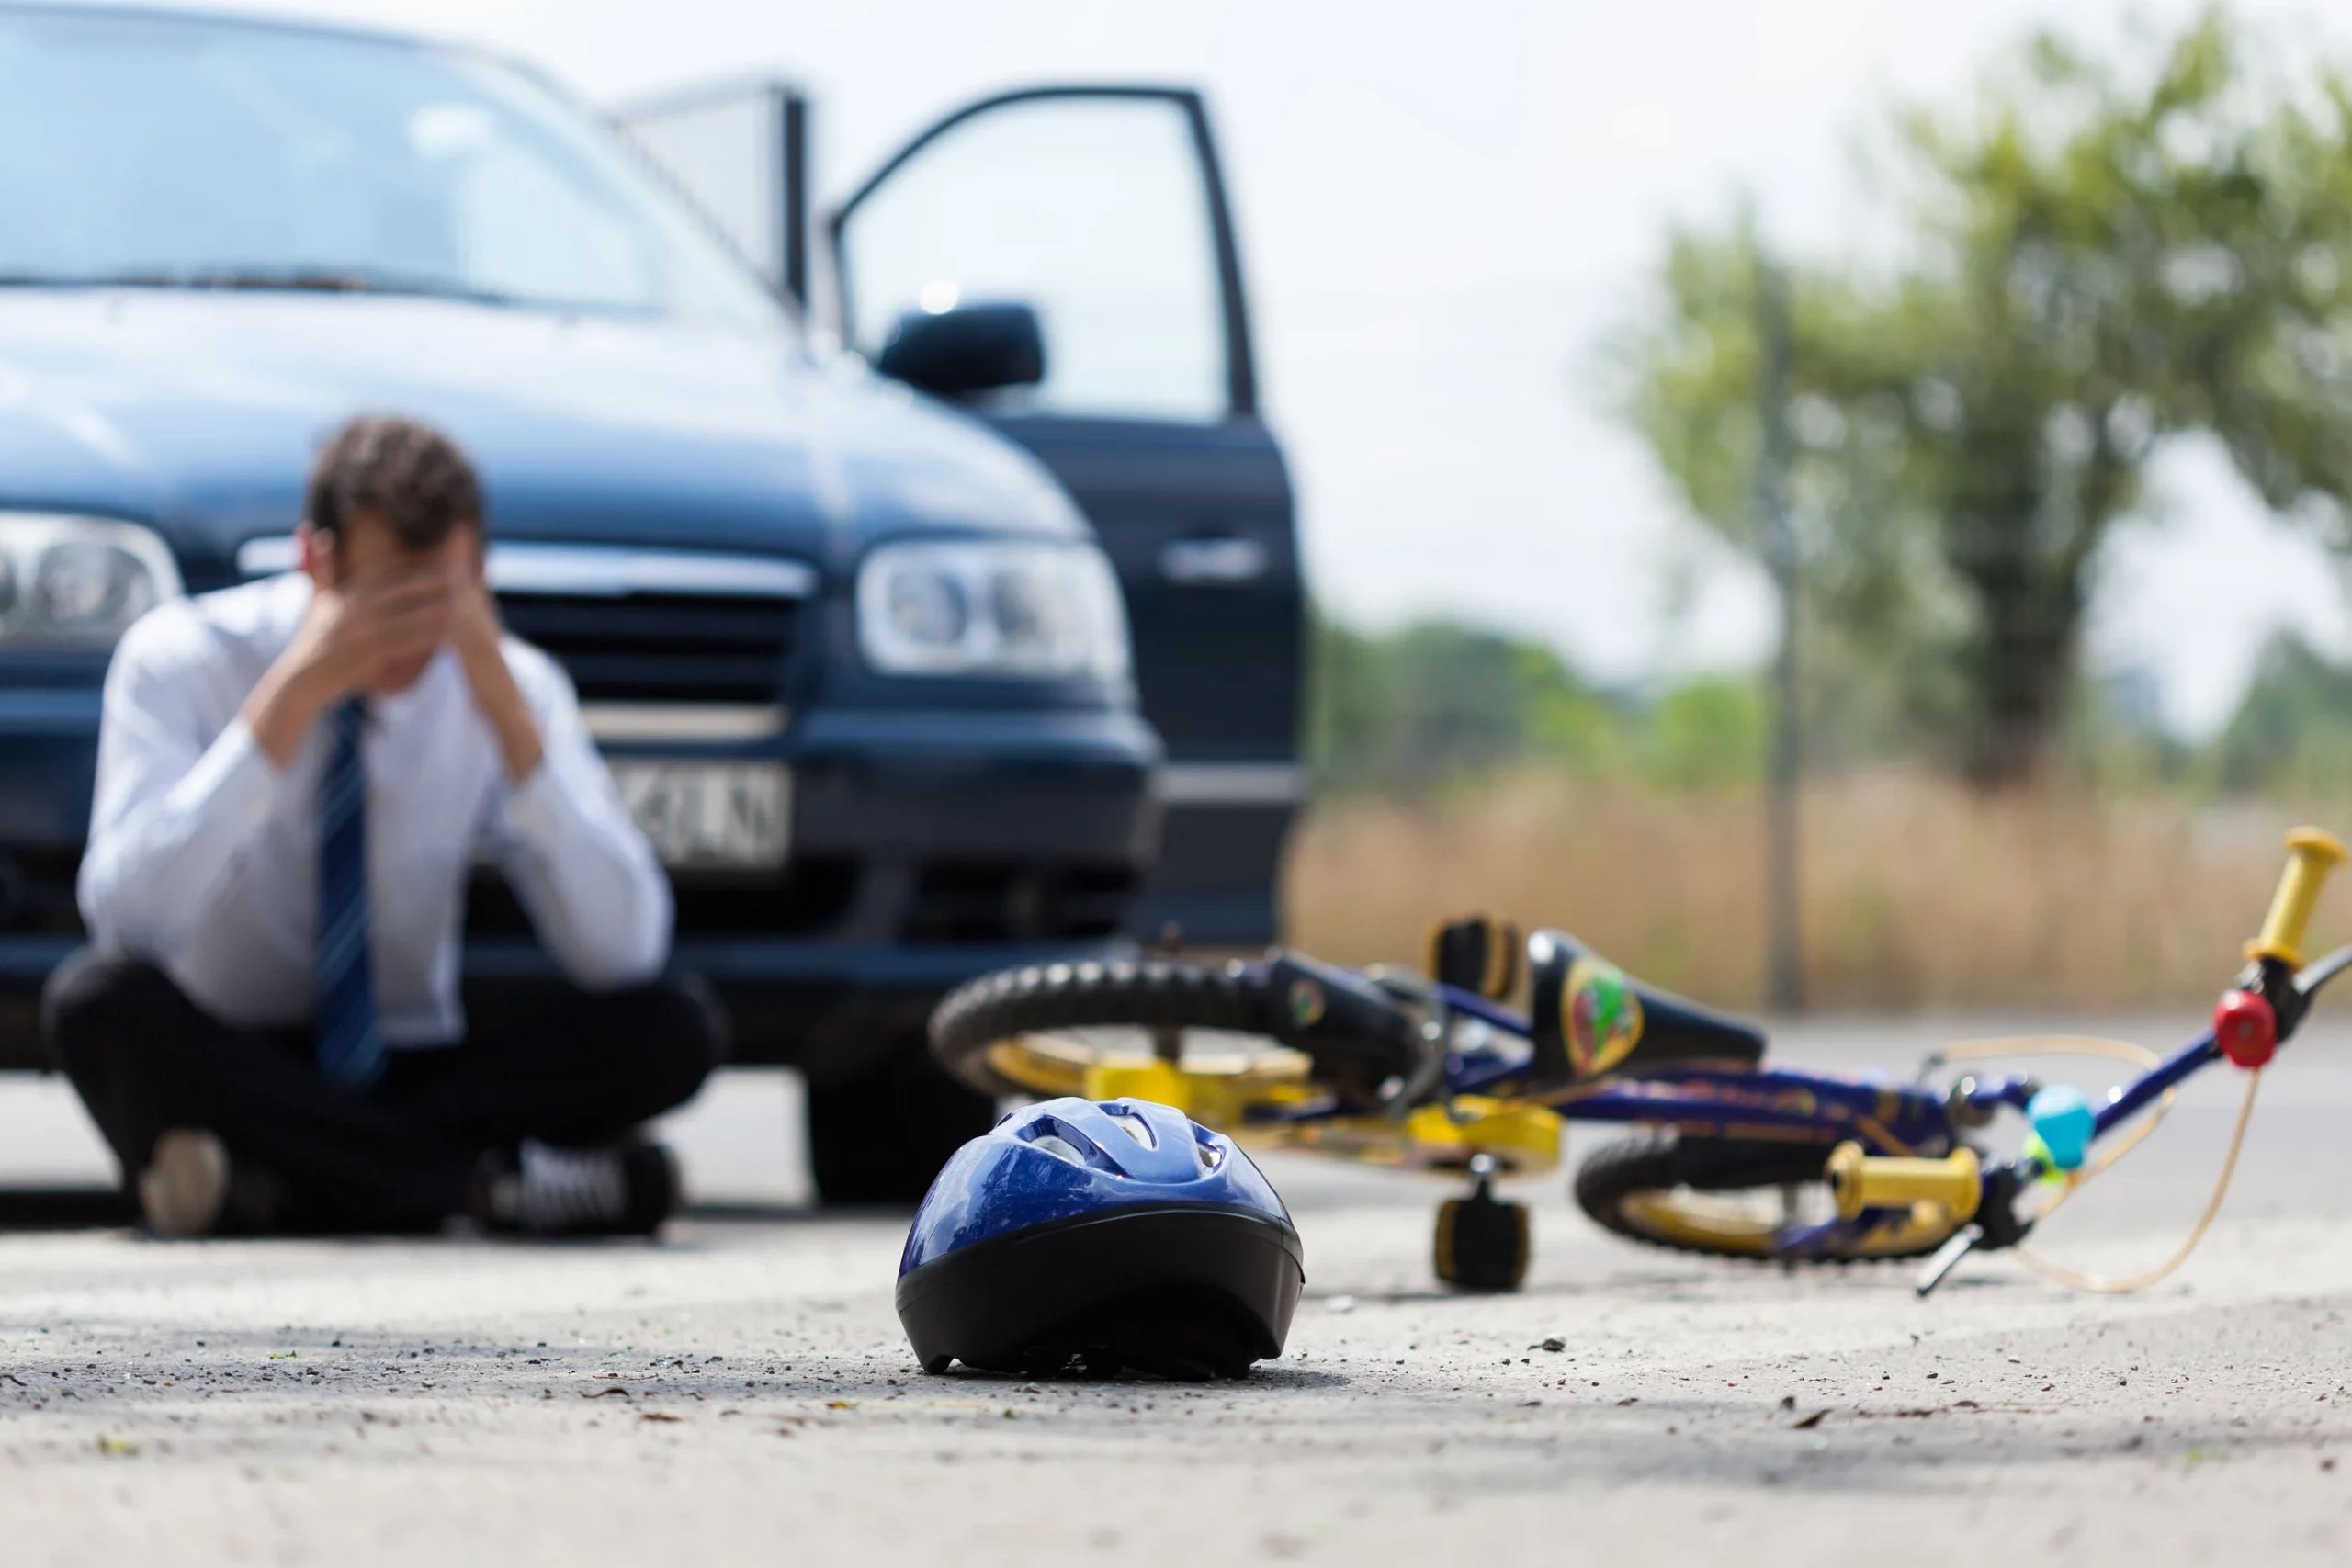 do after bicycle accident